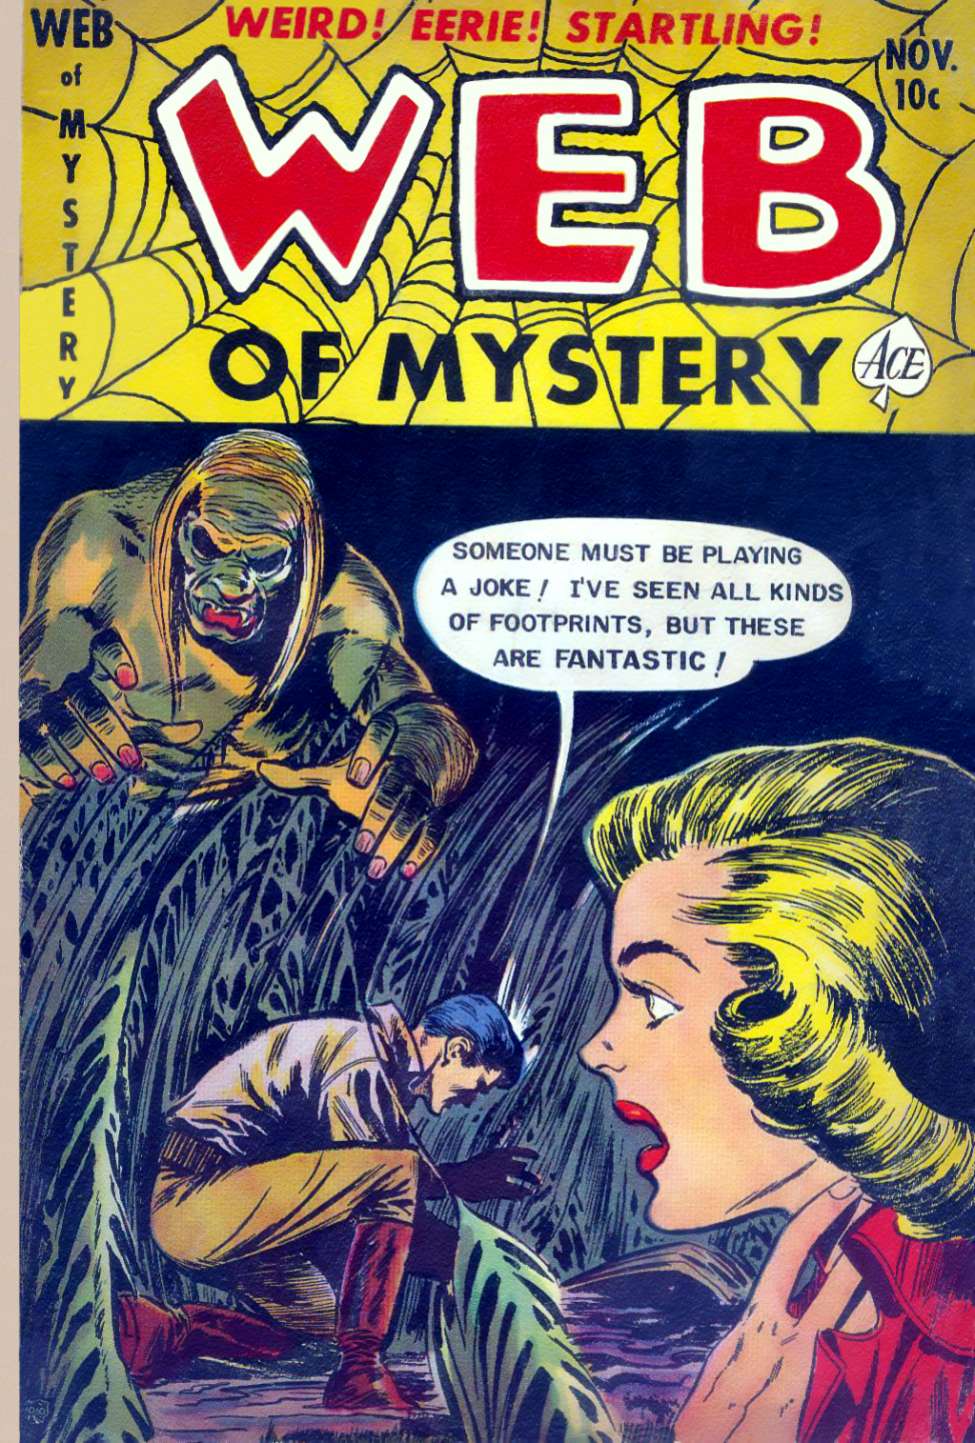 Book Cover For Web of Mystery 15